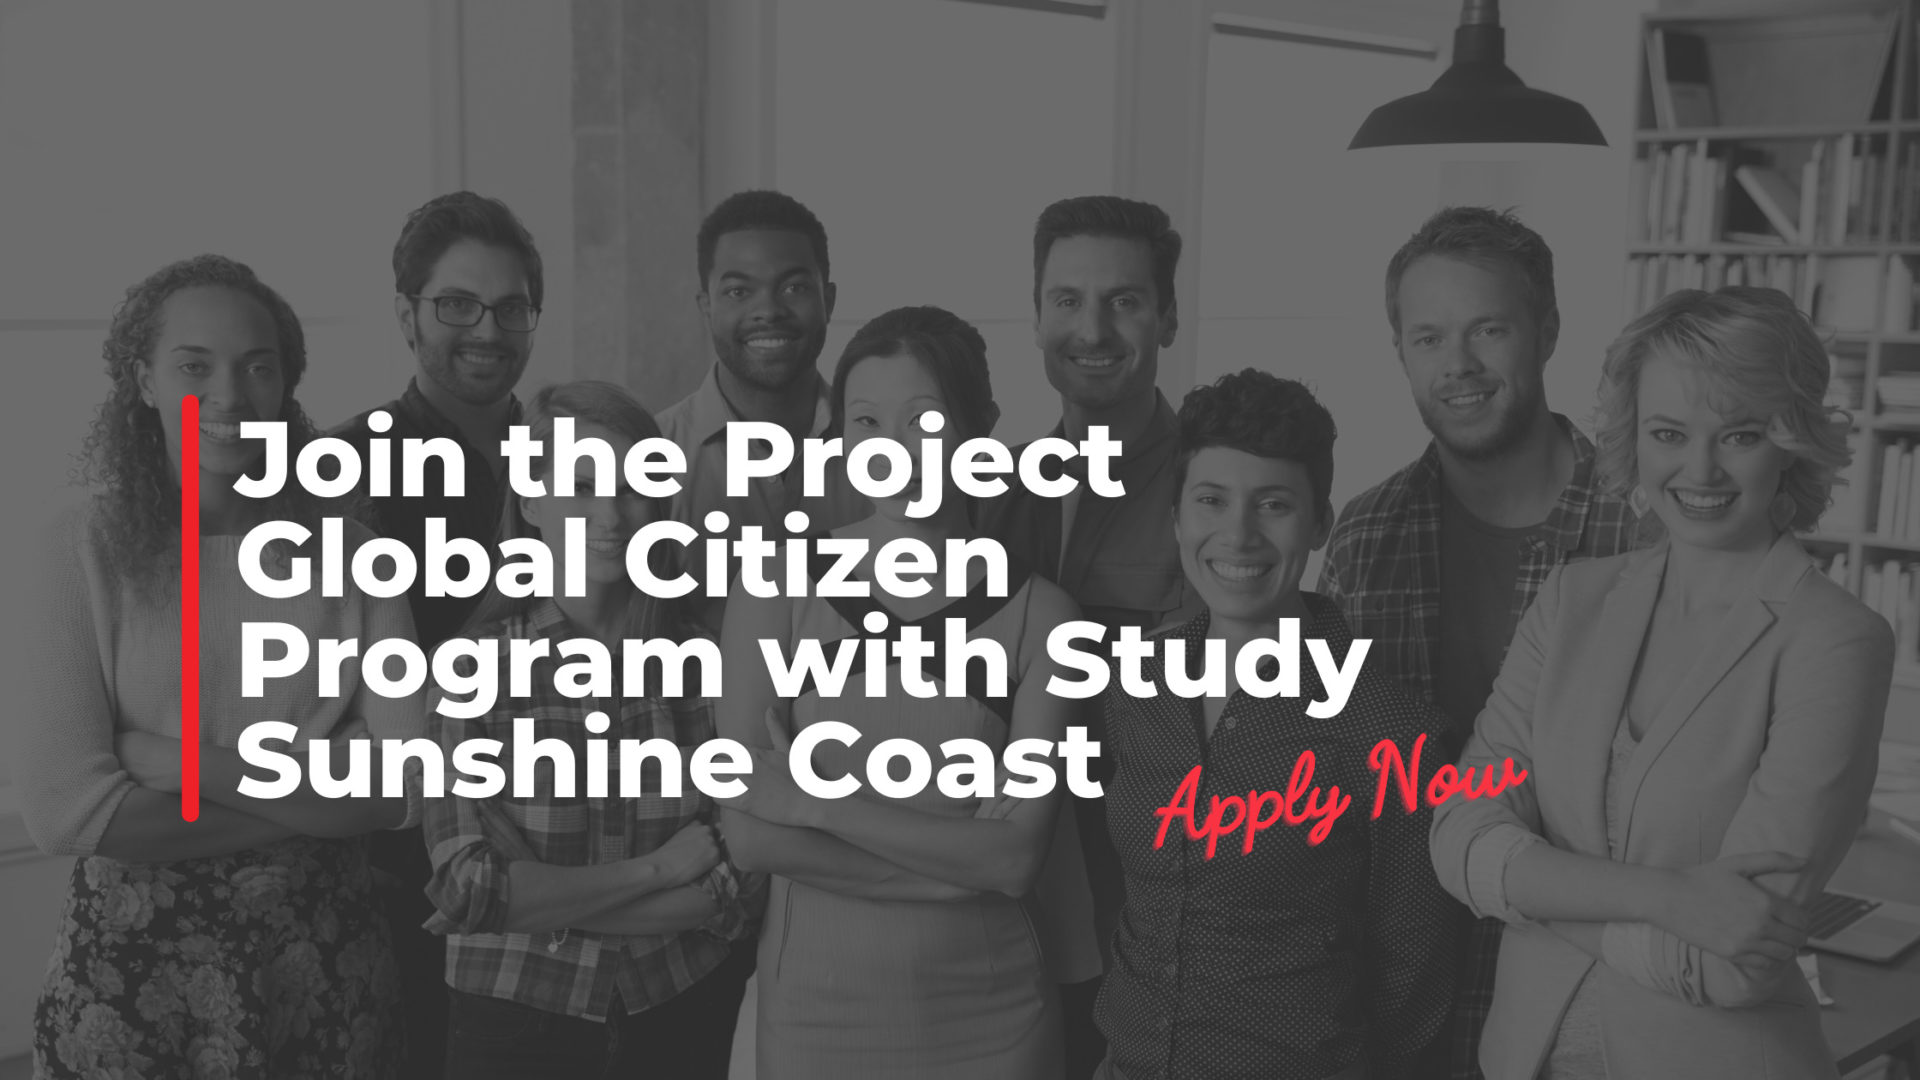 Join the Project Global Citizen Program with Study Sunshine Coast